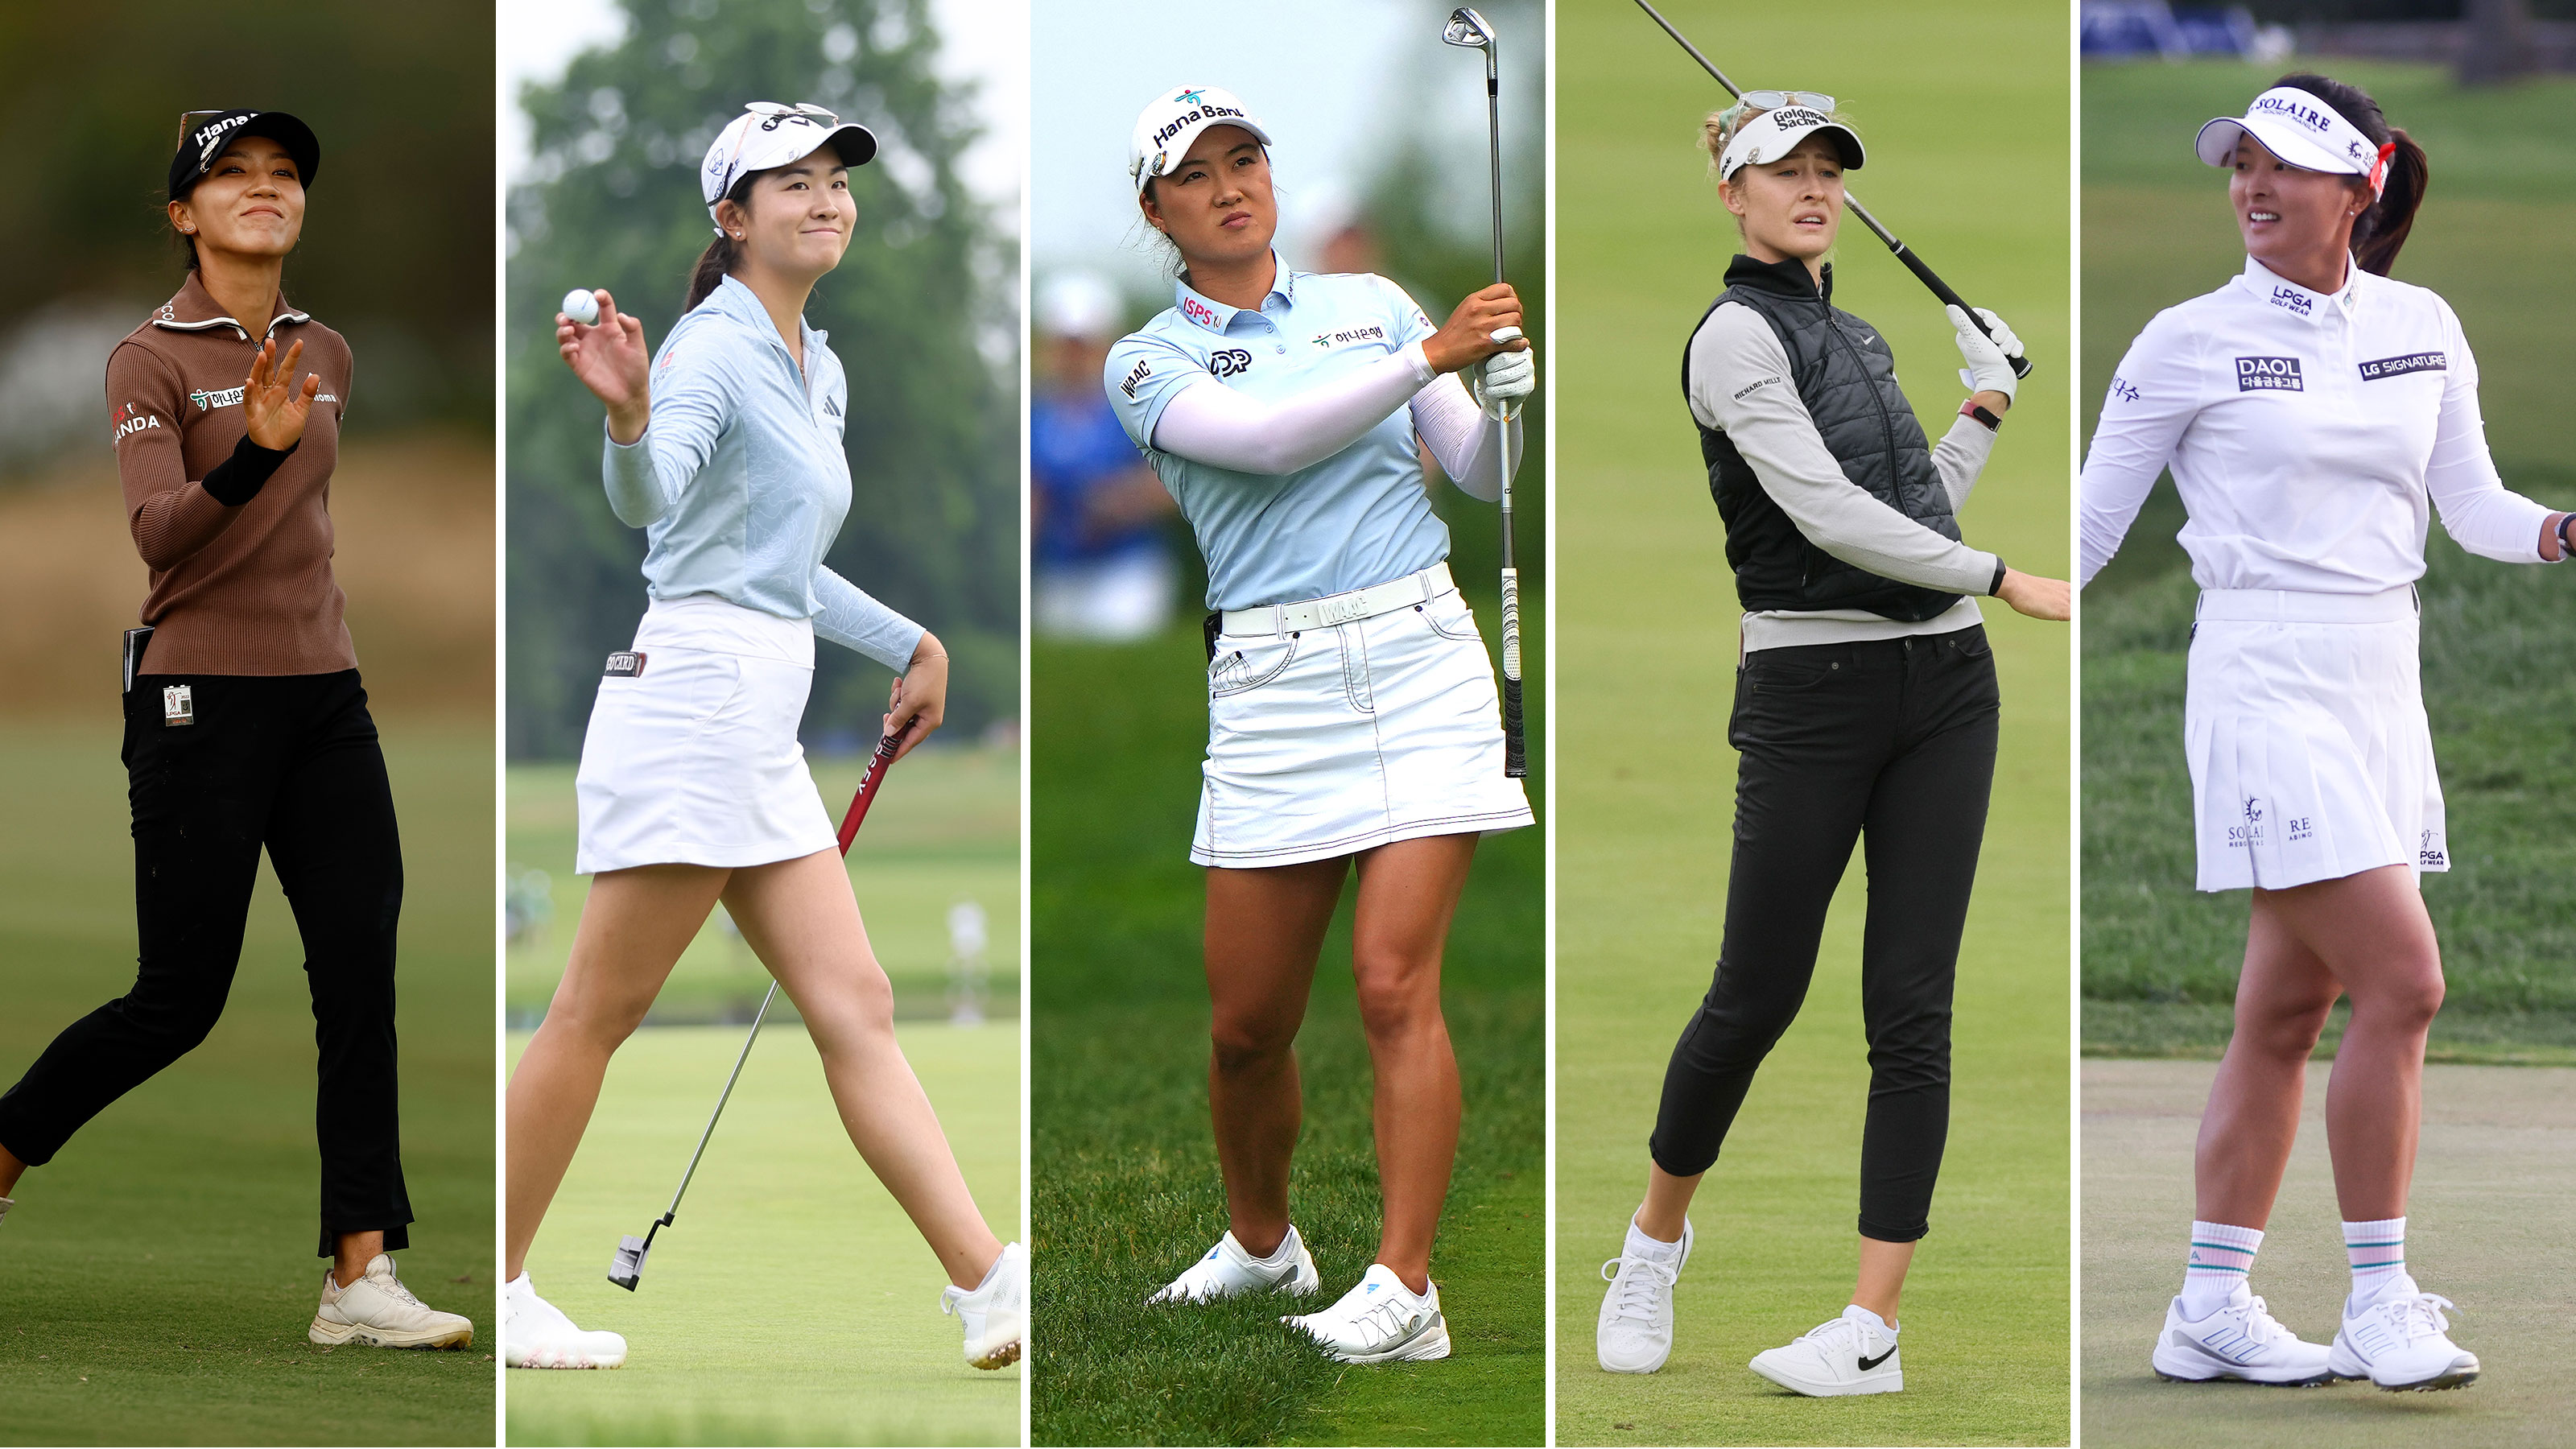 The top 25 players competing at the 2023 U.S. Women's Open, ranked